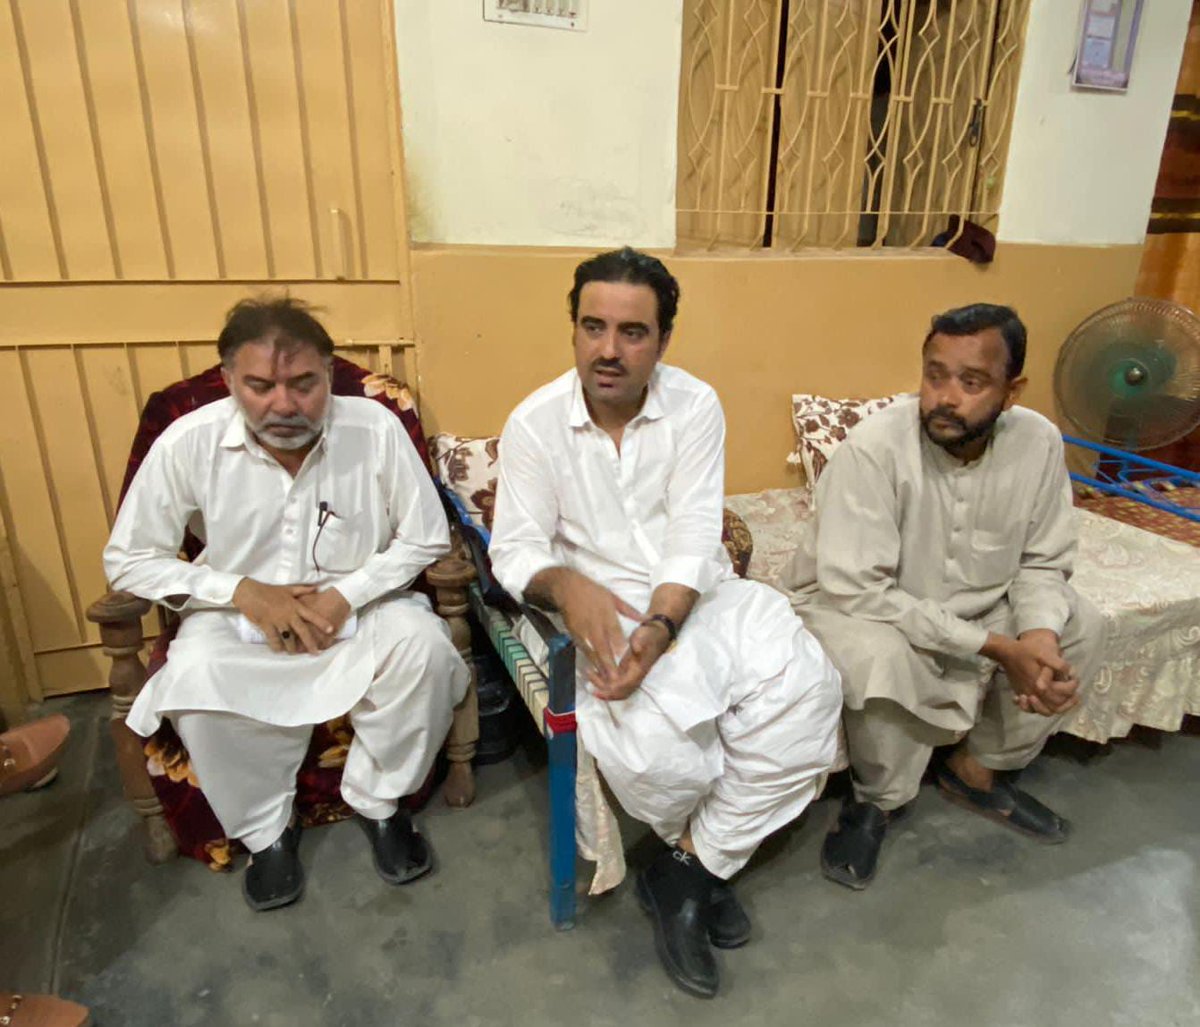 Member Sindh Assembly Najam Mirzabhai met the dignitaries of the area in Landhi Sherpao Colony. On this occasion, the central officials of KMOC were also present.
@Najmmirza 
@Nadirqureshi 
@AllaboutNNTMQMp 
@HammadMallick13 
@adilaskari 
@majuism 
@FarhanAnsariMQM 
@ShariqMQMPk